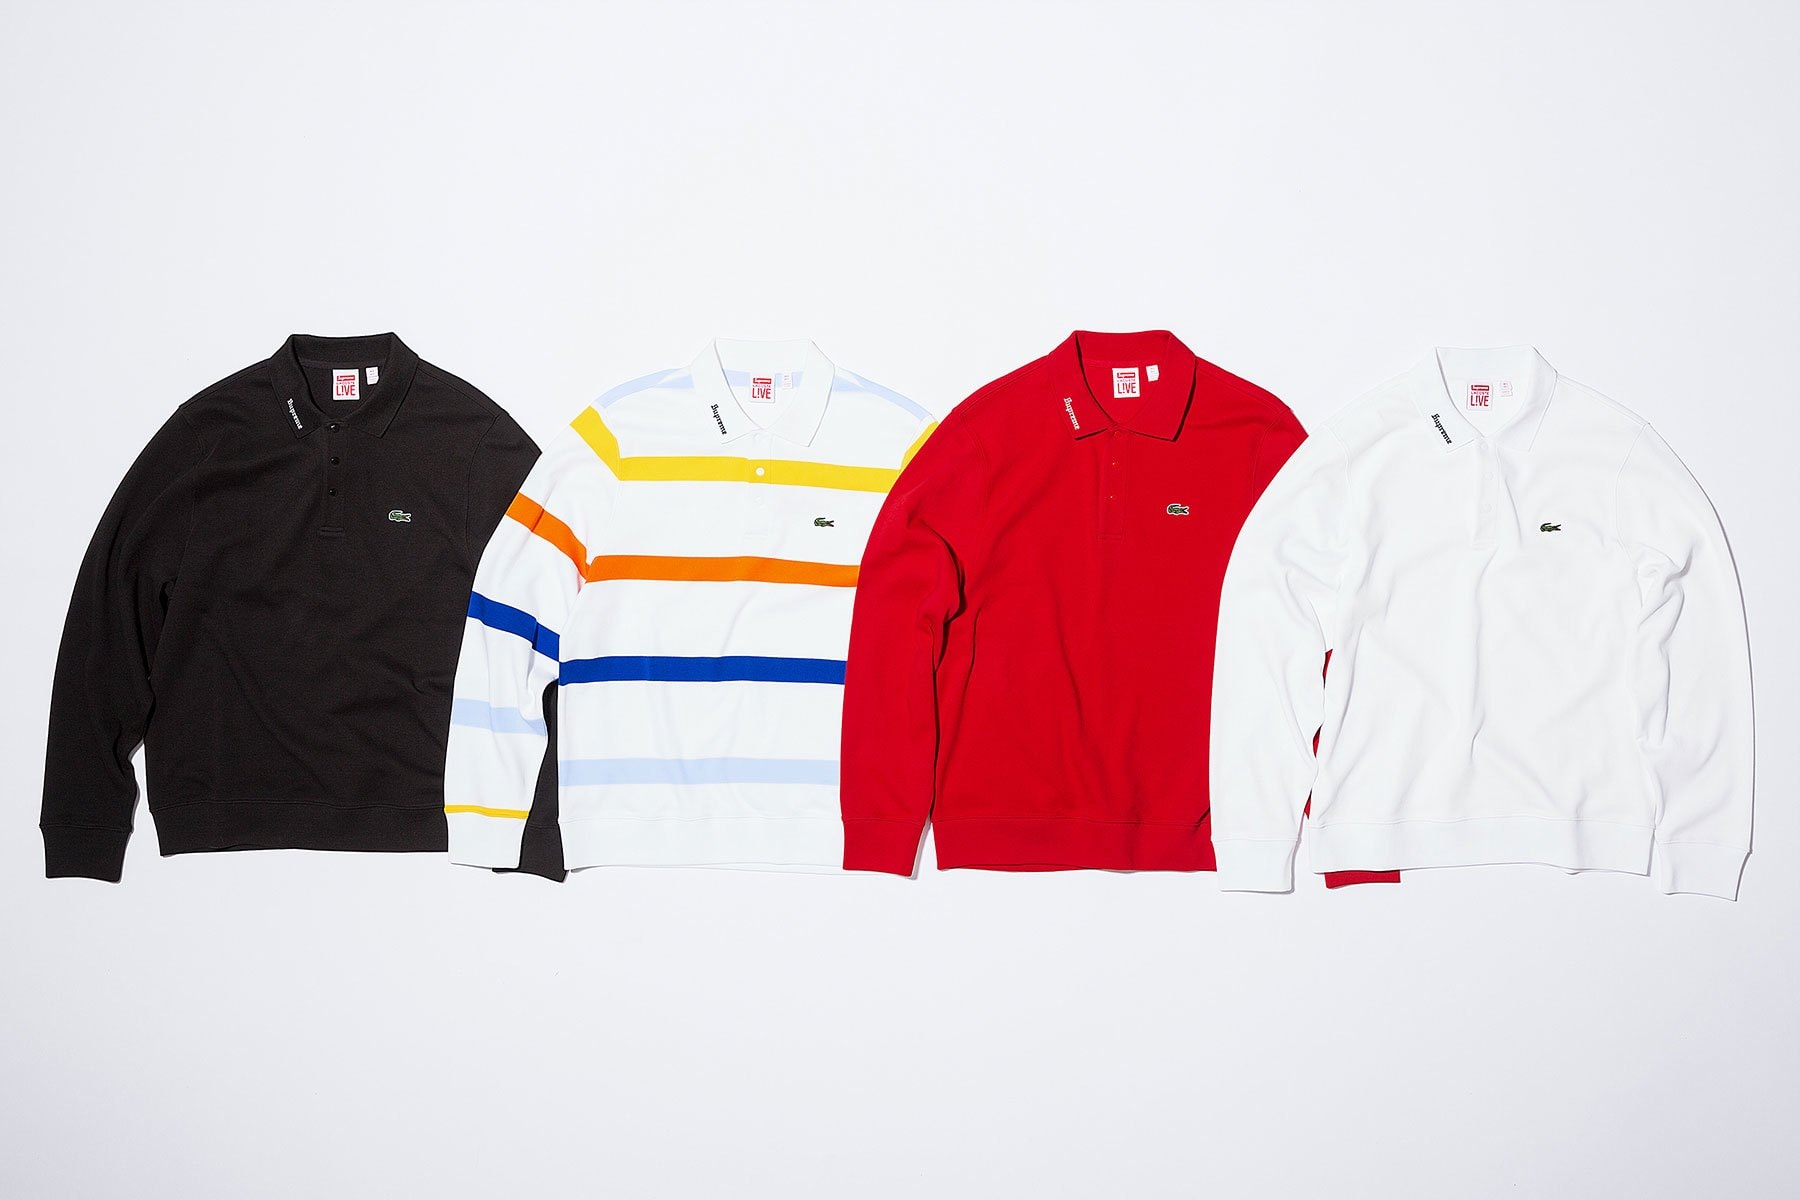 Lacoste x Supreme 2017 Spring/Summer Collection